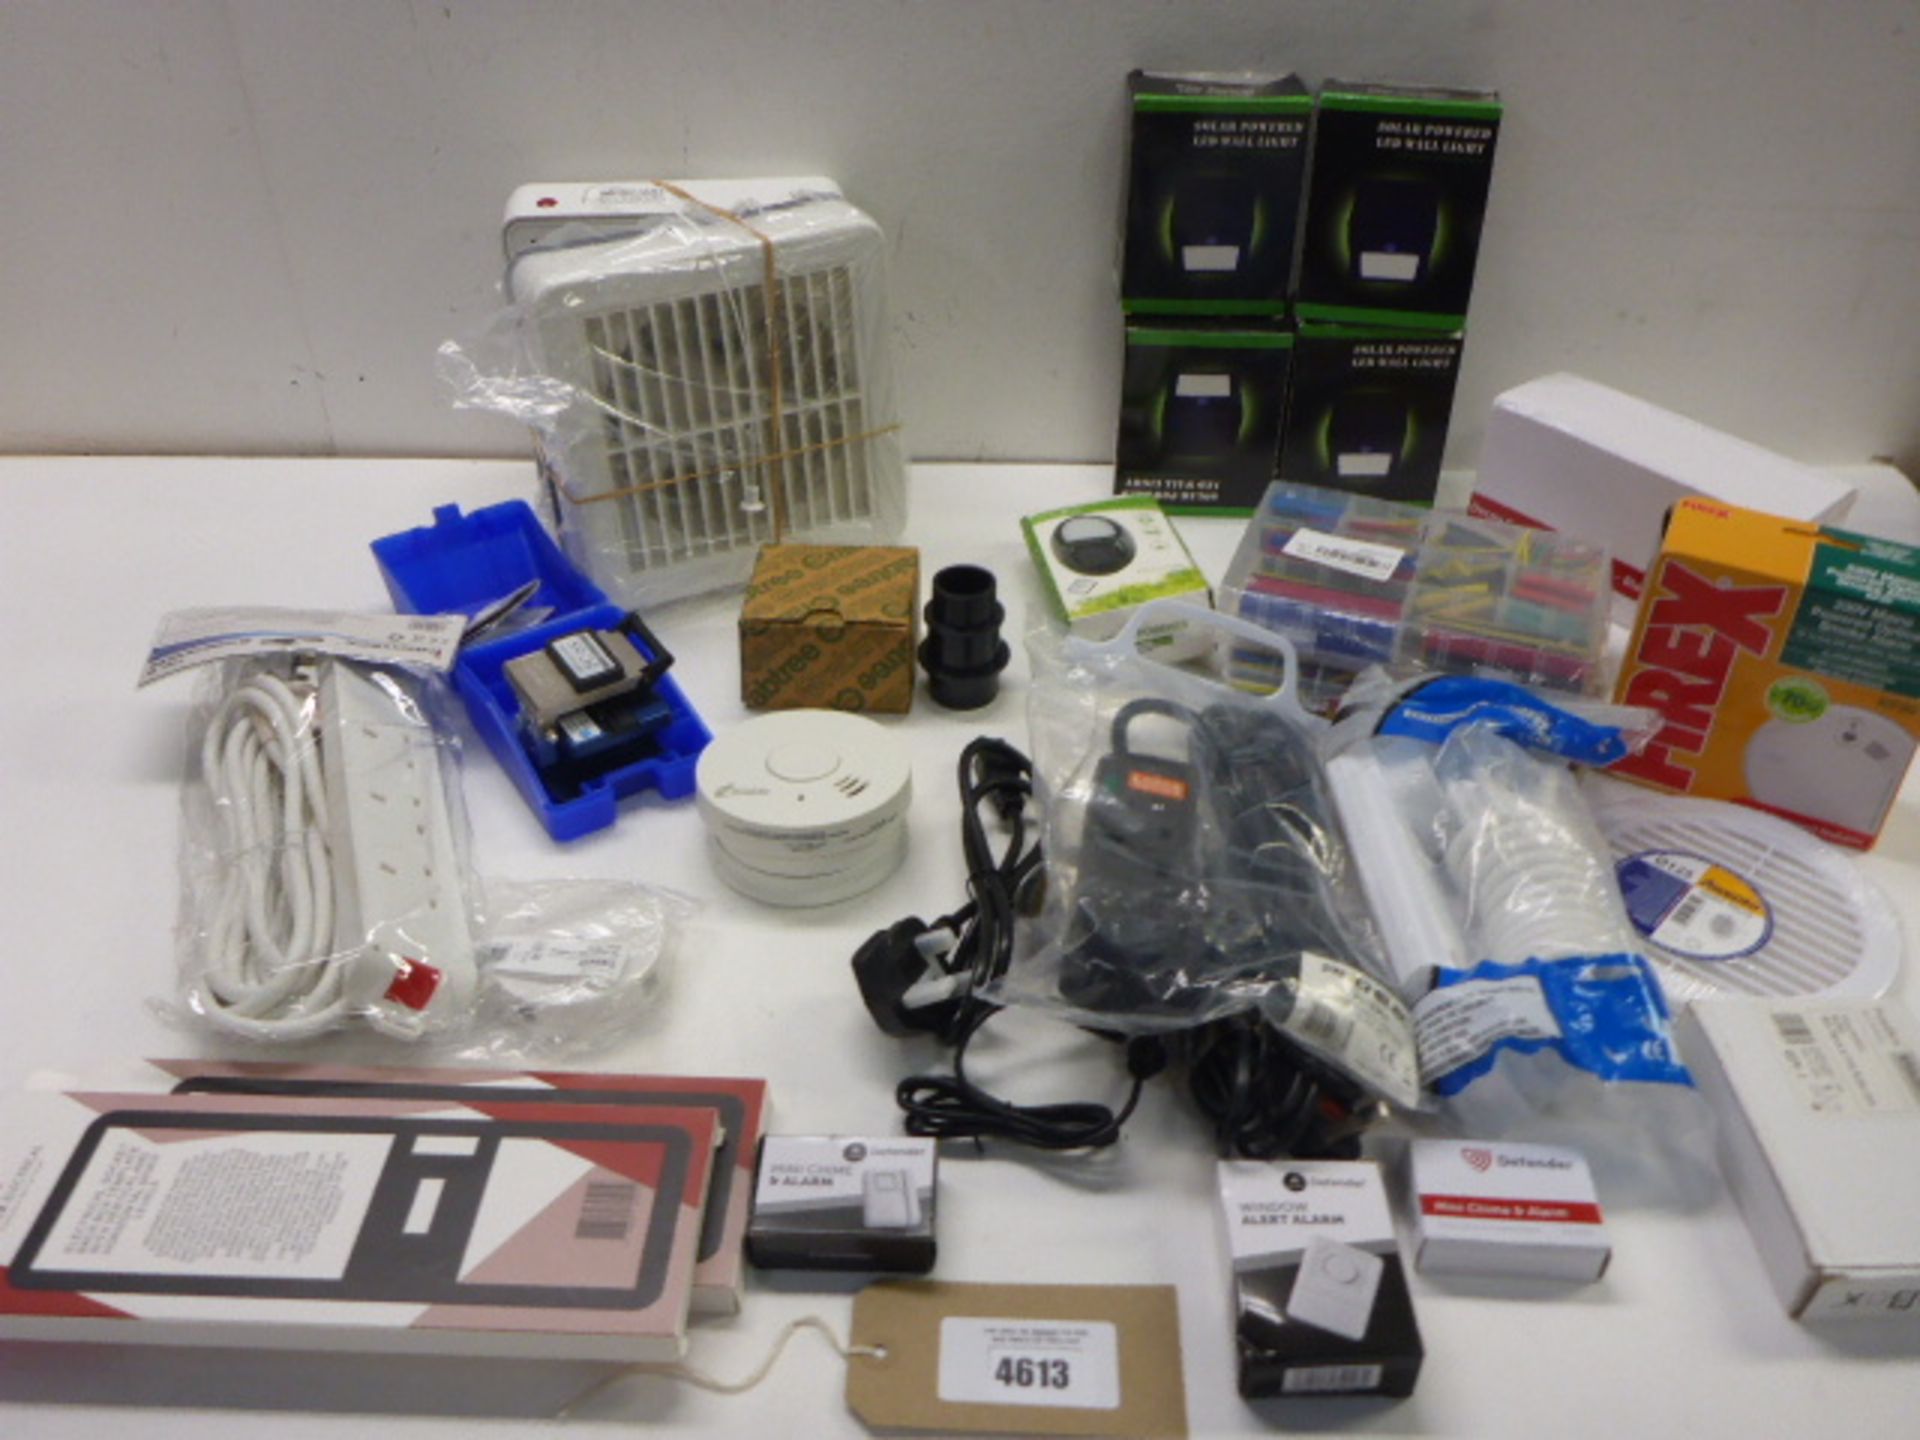 Solar wall lights, extension cables, extractor fan, smoke alarm, Dummy cameras, switches and